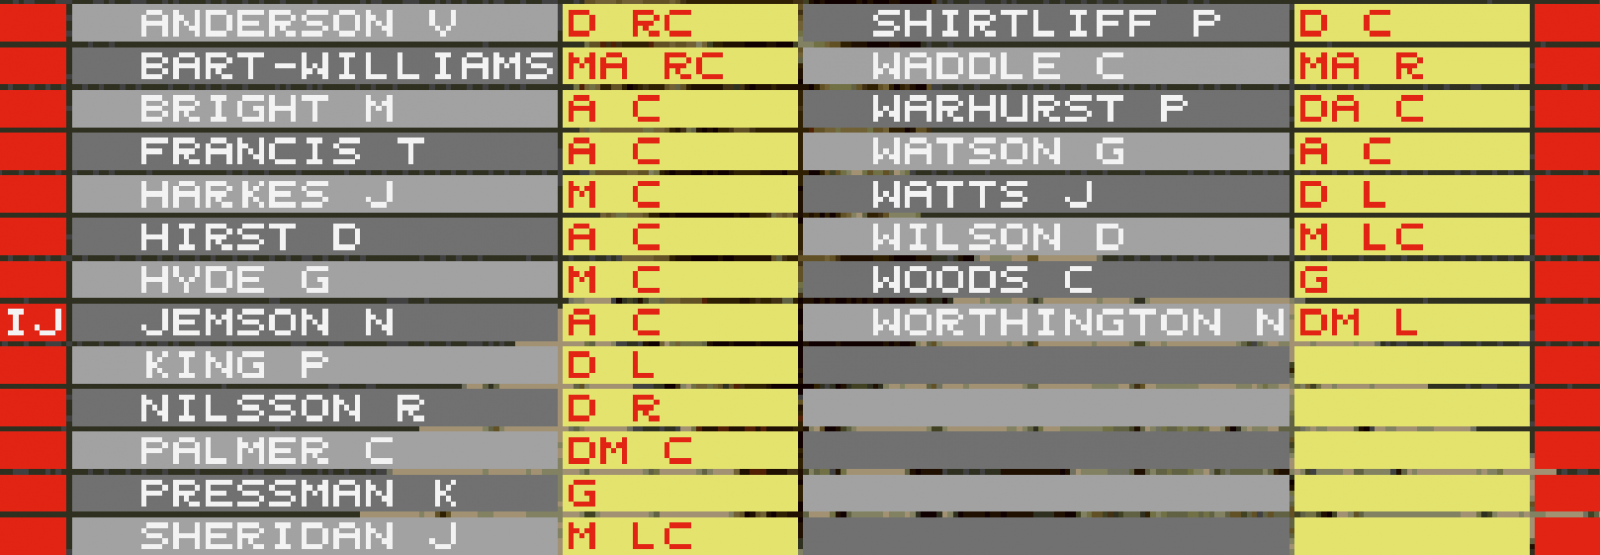 SWFC93.PNG